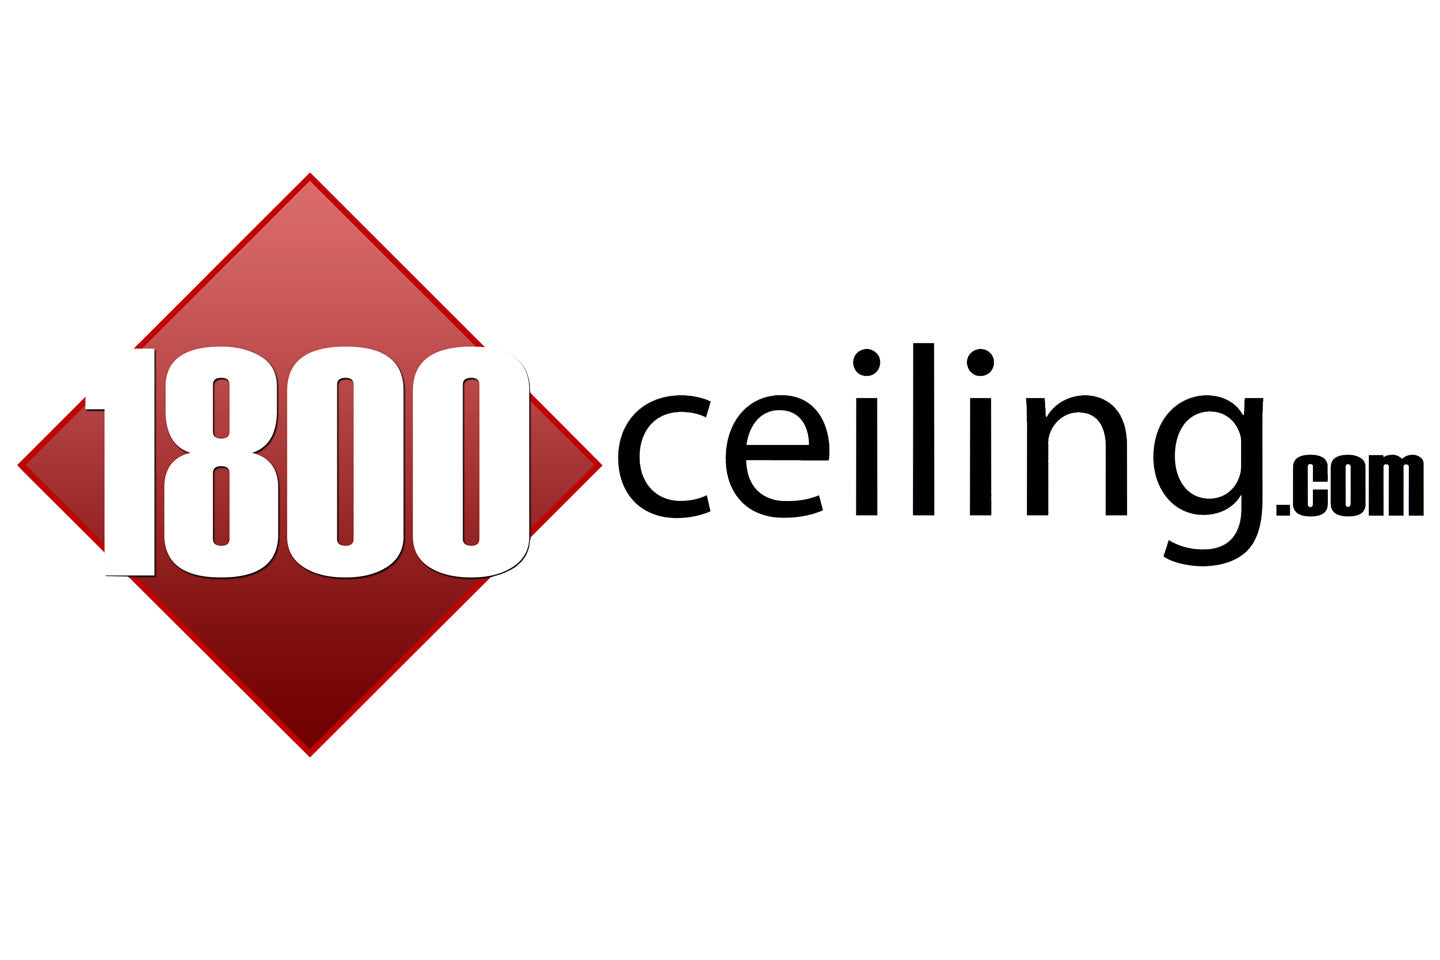 10% Off With 1800ceiling Coupon Code